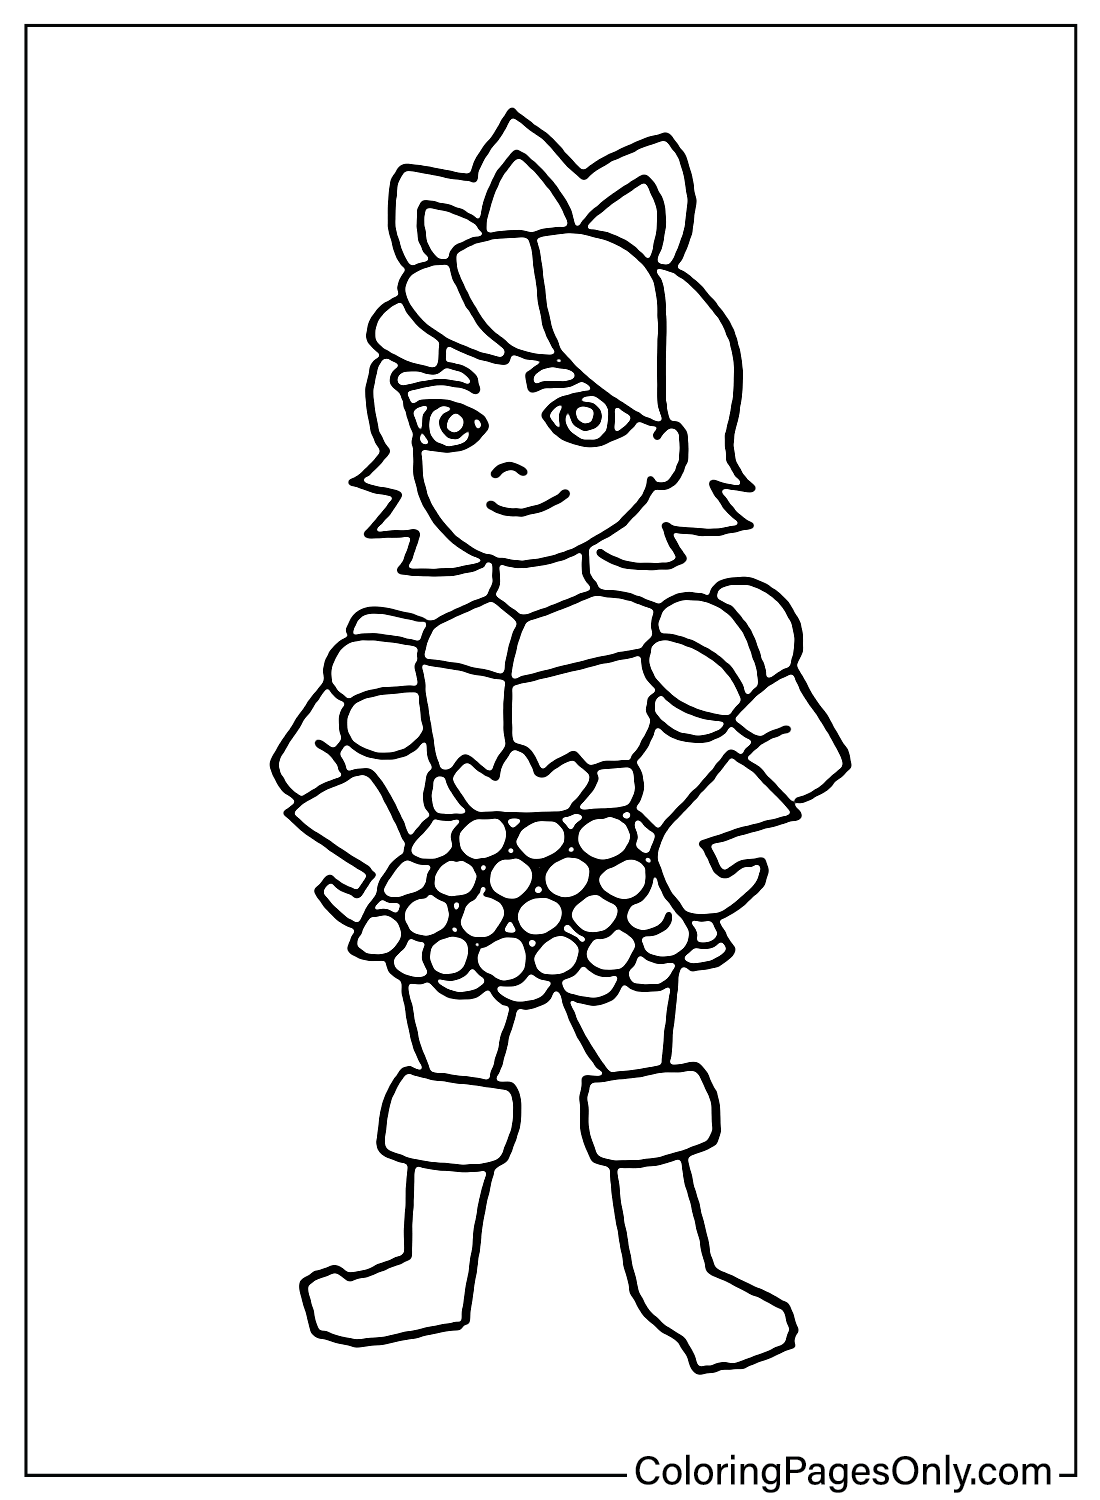 The Princess Clash Of Clans Coloring Pages from Clash of Clans